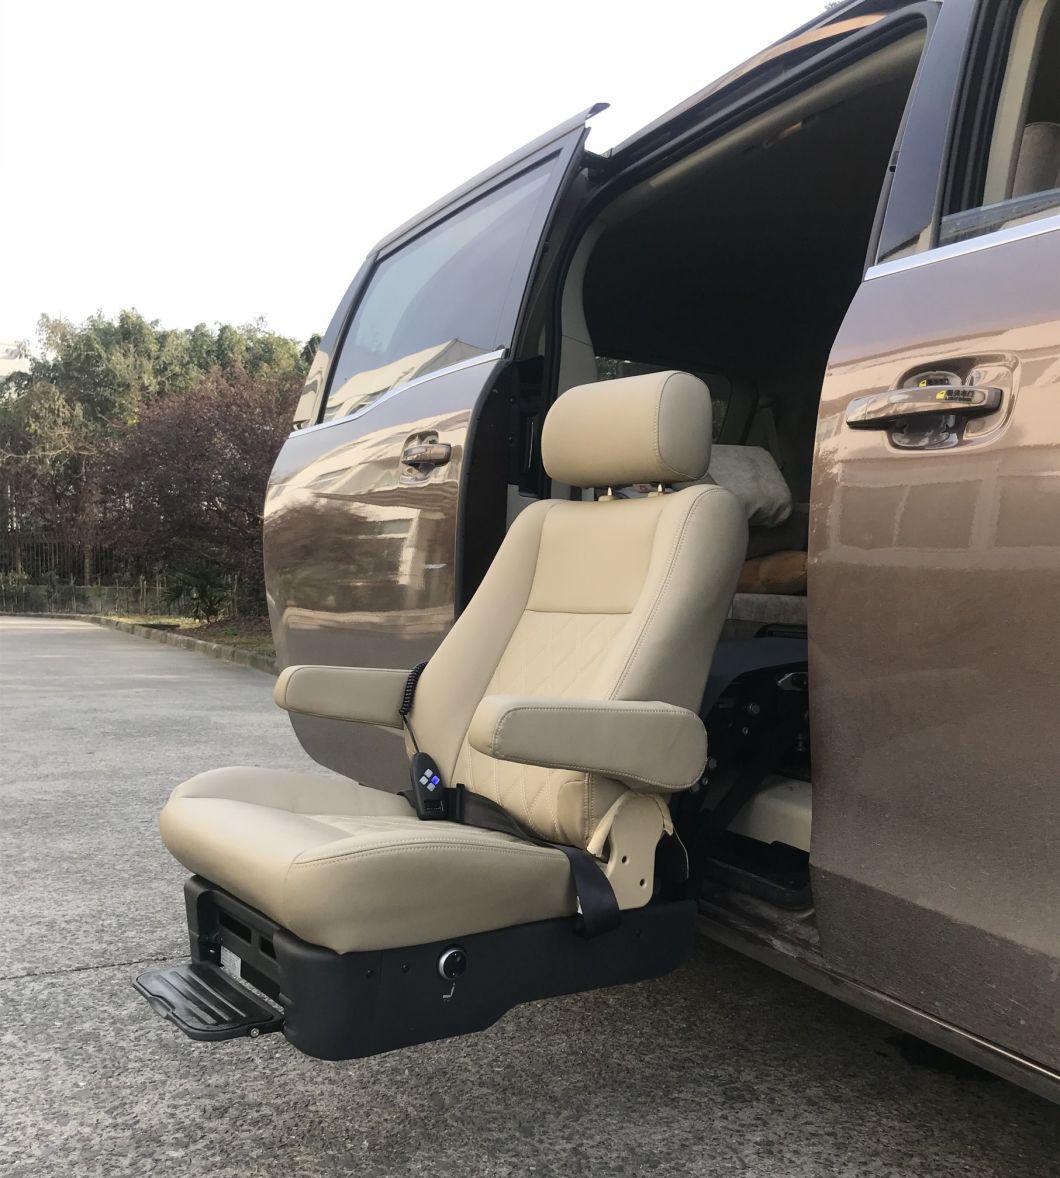 Van Swivel Car Seat System for The Disabled with Loading 150kg